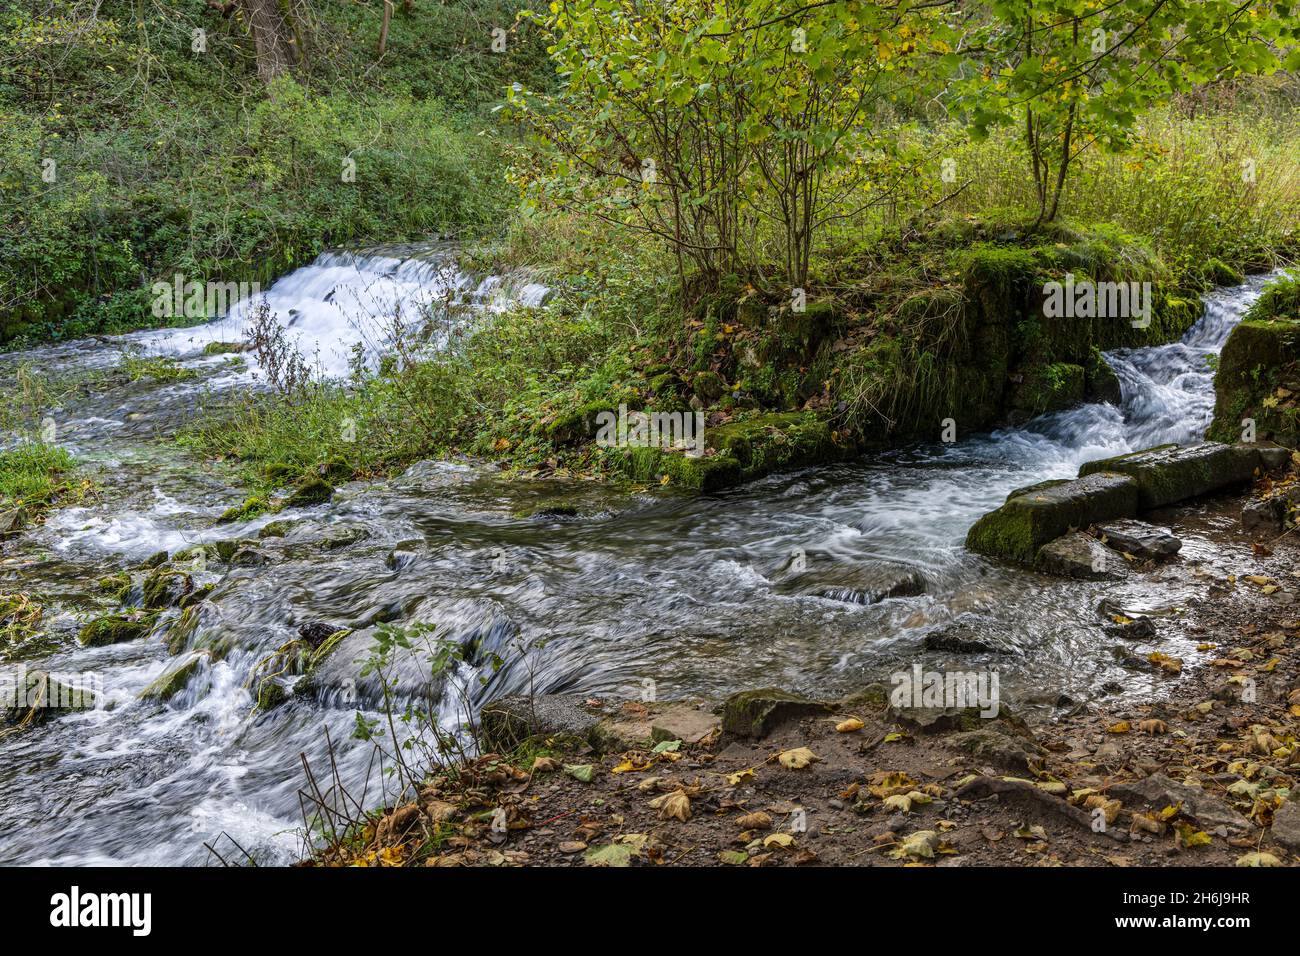 A picturesque weir over limestone rocks near the Fishponds, River Lathkill, Lathkill Dale, Peak District National Park, Derbyshire, England. Stock Photo